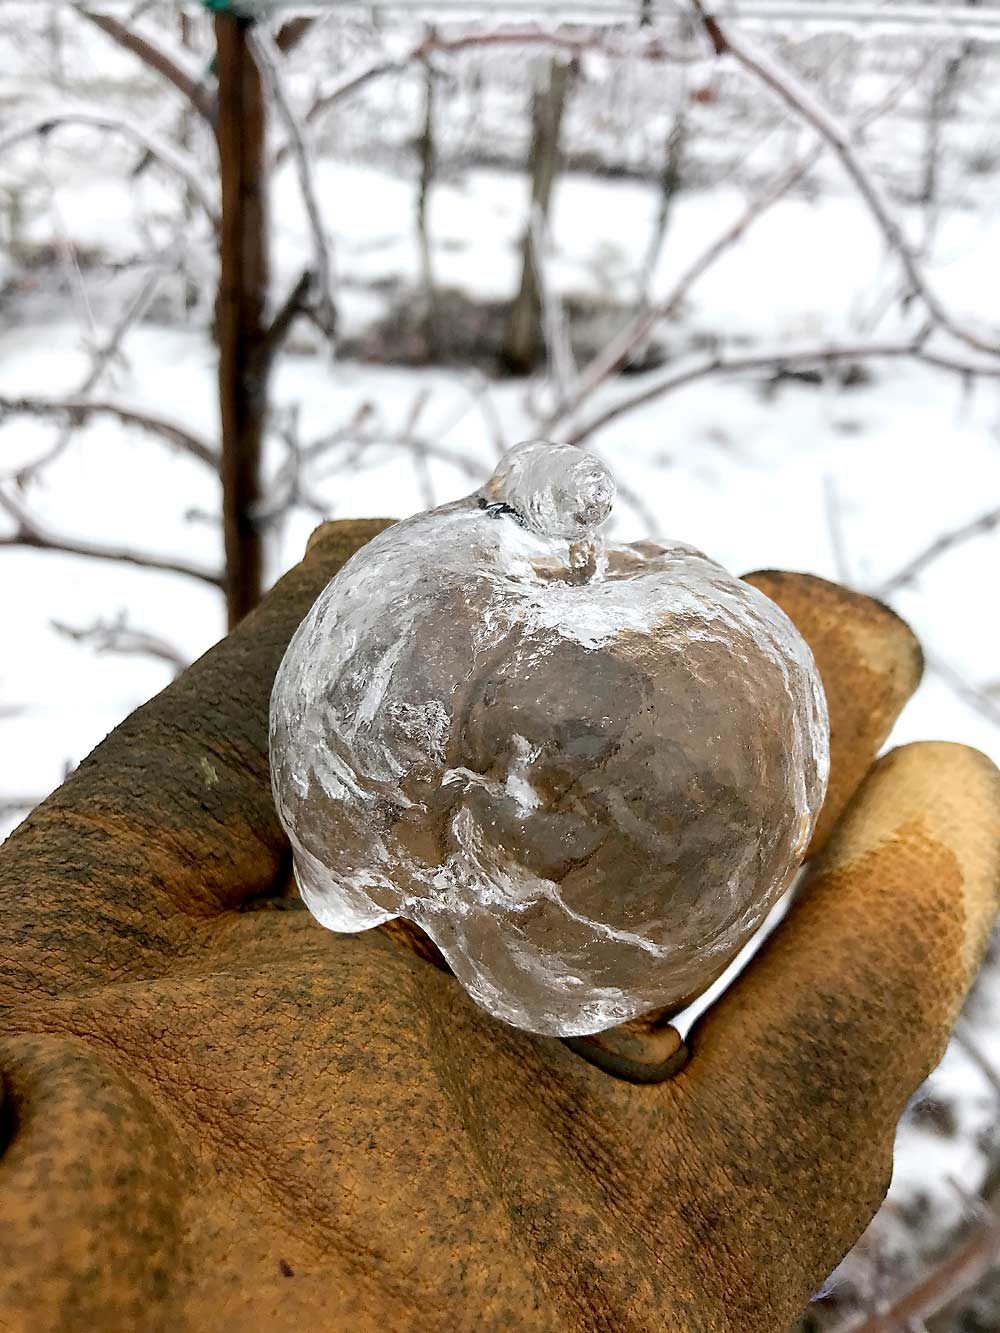 Andrew Sietsema holds the ice-shaped “ghost” of this Jonagold apple that he found while pruning last winter. Sietsema dubbed them “Jonaghosts” when his photos went viral online. (Courtesy Andrew Sietsema)